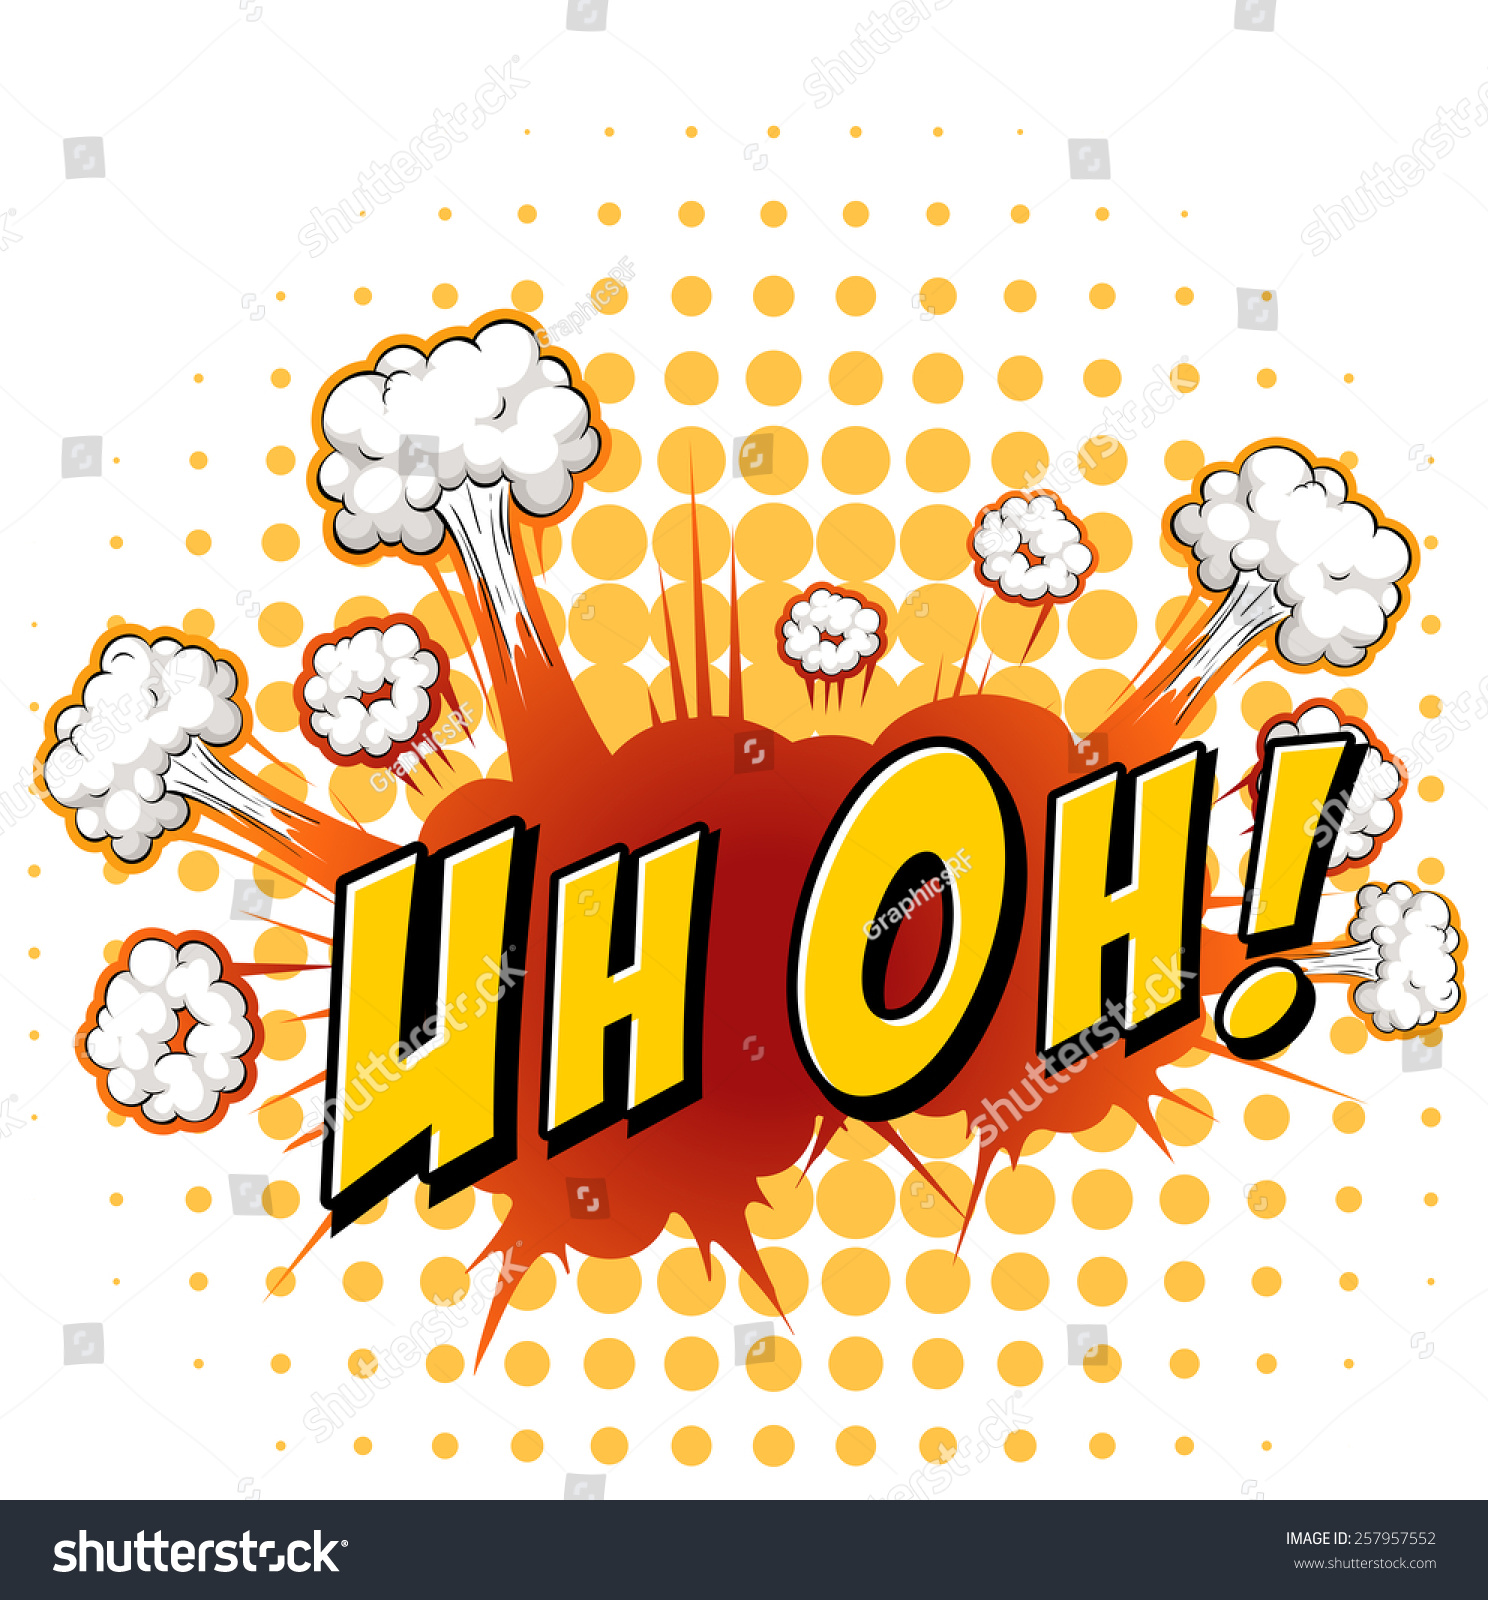 Expression Word Uh Oh Stock Vector (Royalty Free) 257957552 Shutterstock.